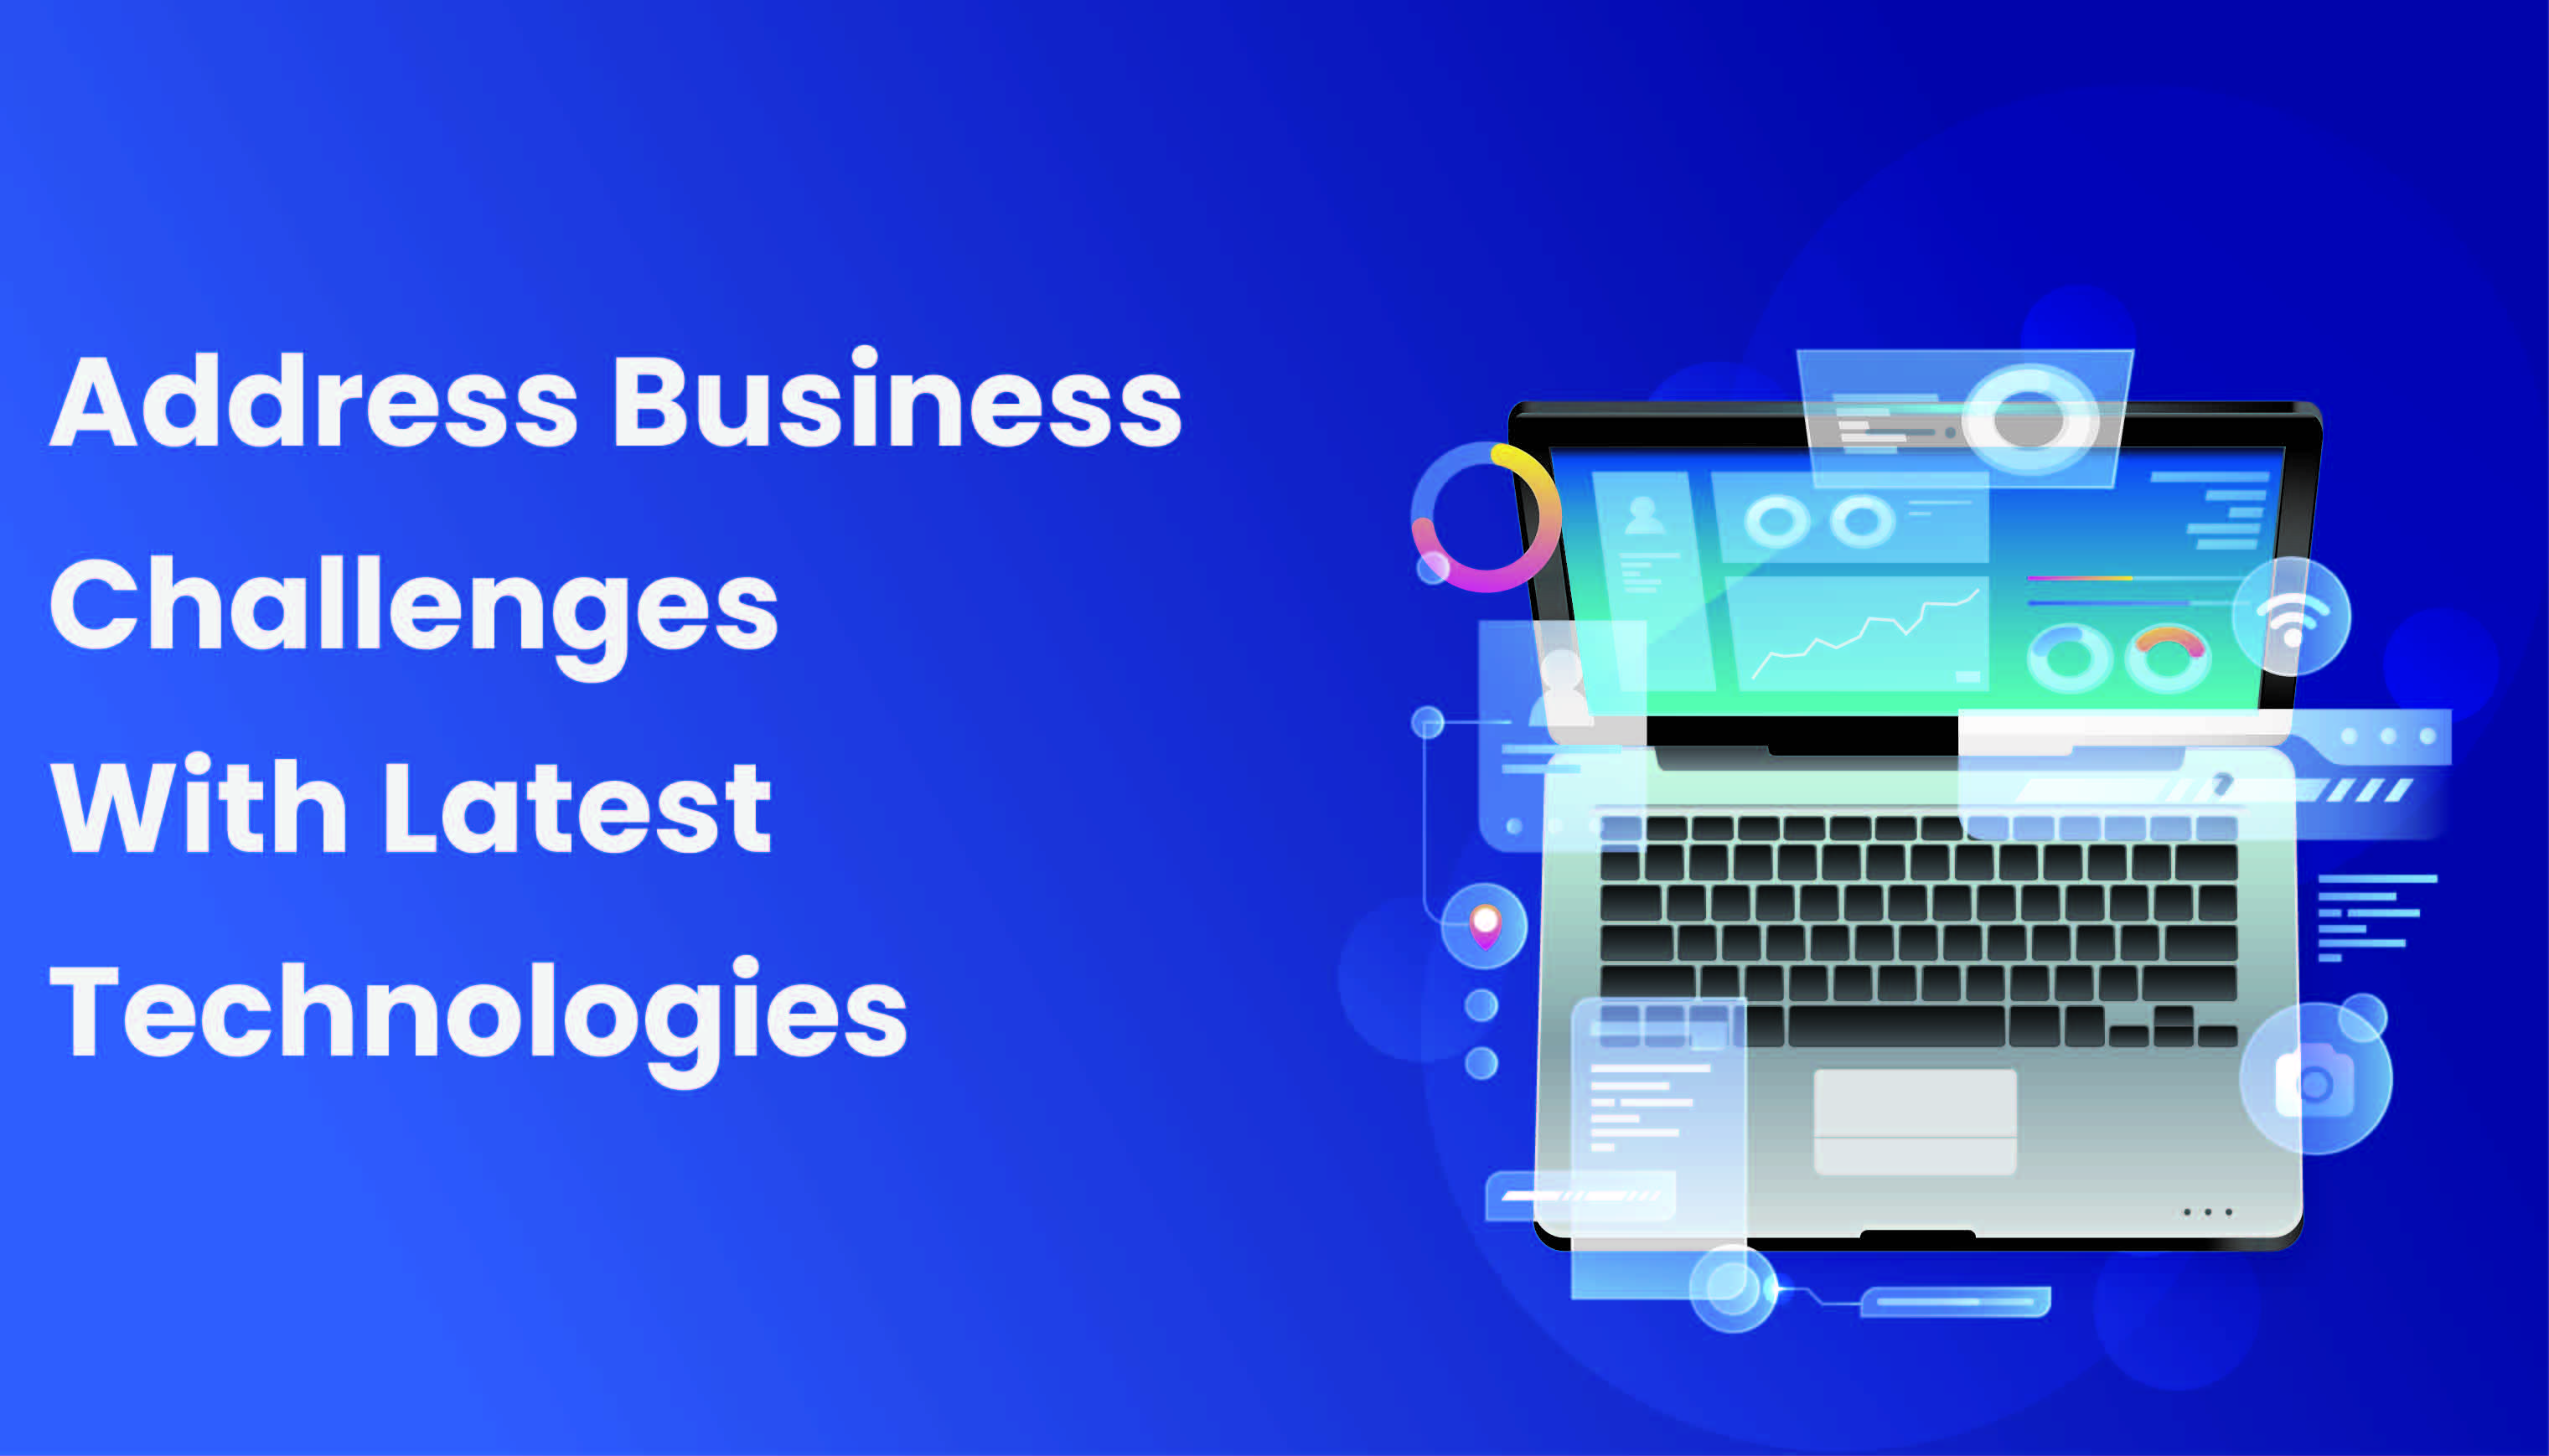 Best Ways To Use Technologies To Address Business Challenges